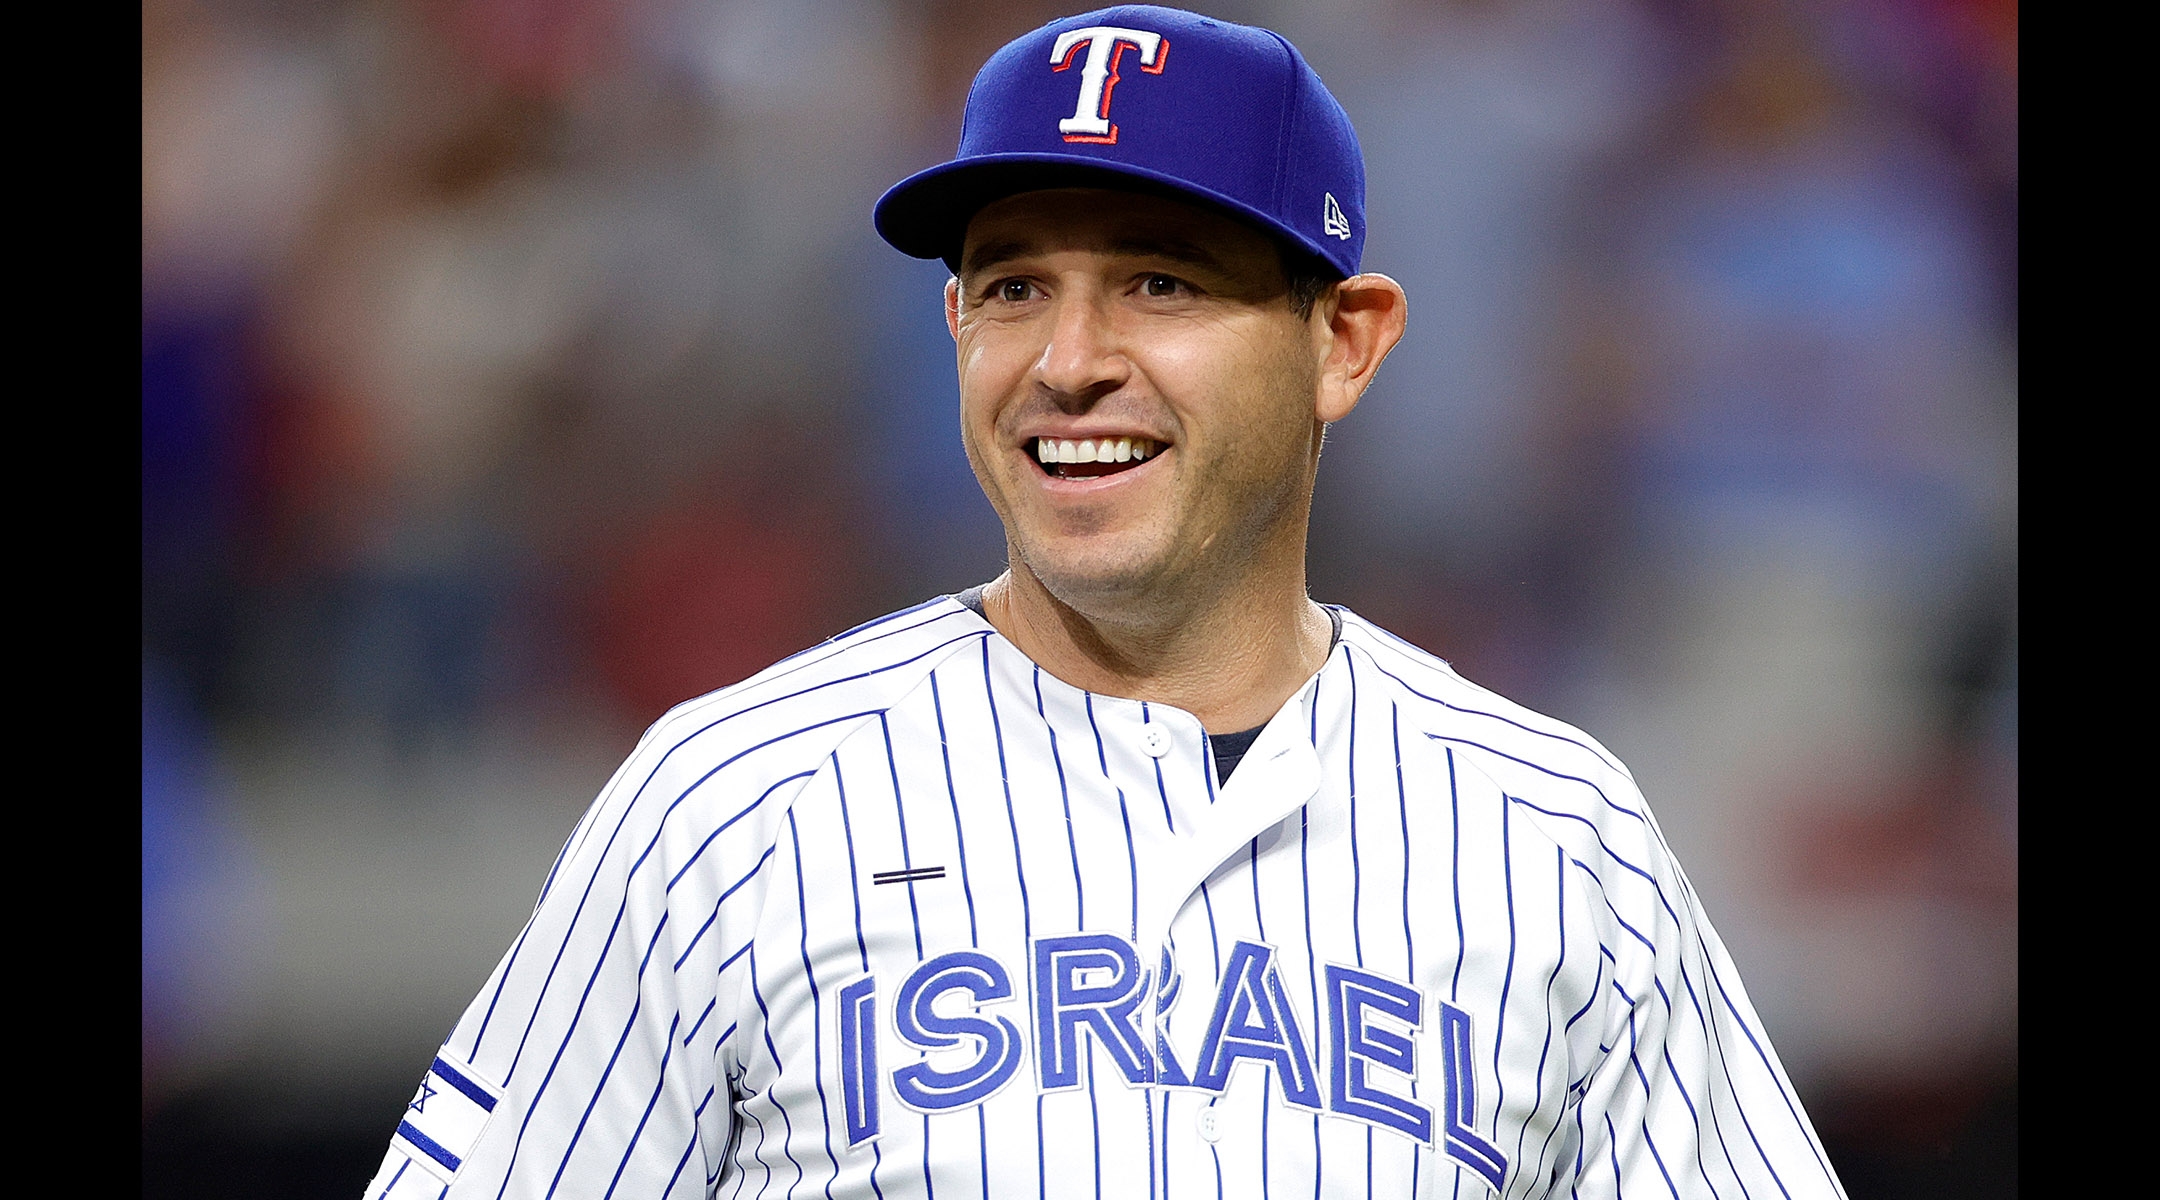 Ian Kinsler to play for Team Israel in Olympic Games